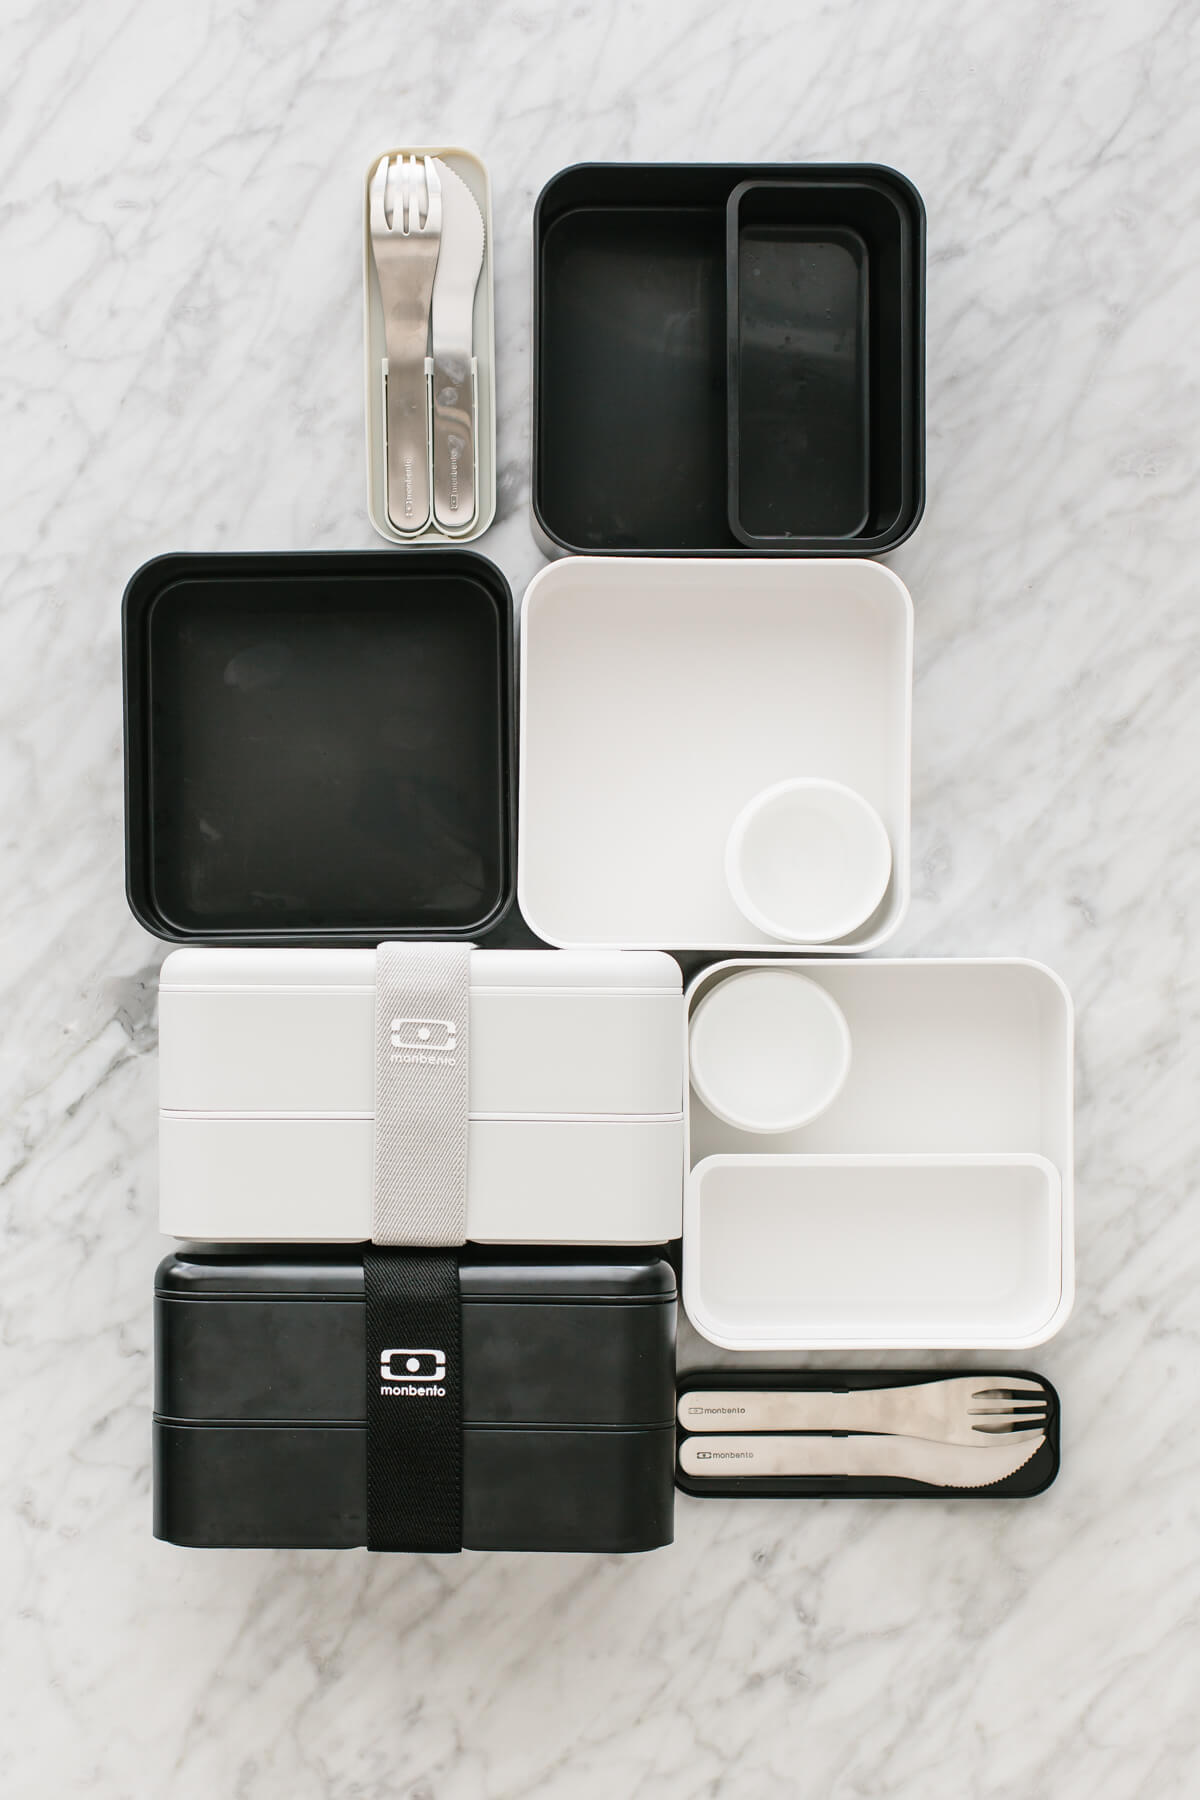 A bunch of empty bento box containers on a countertop.